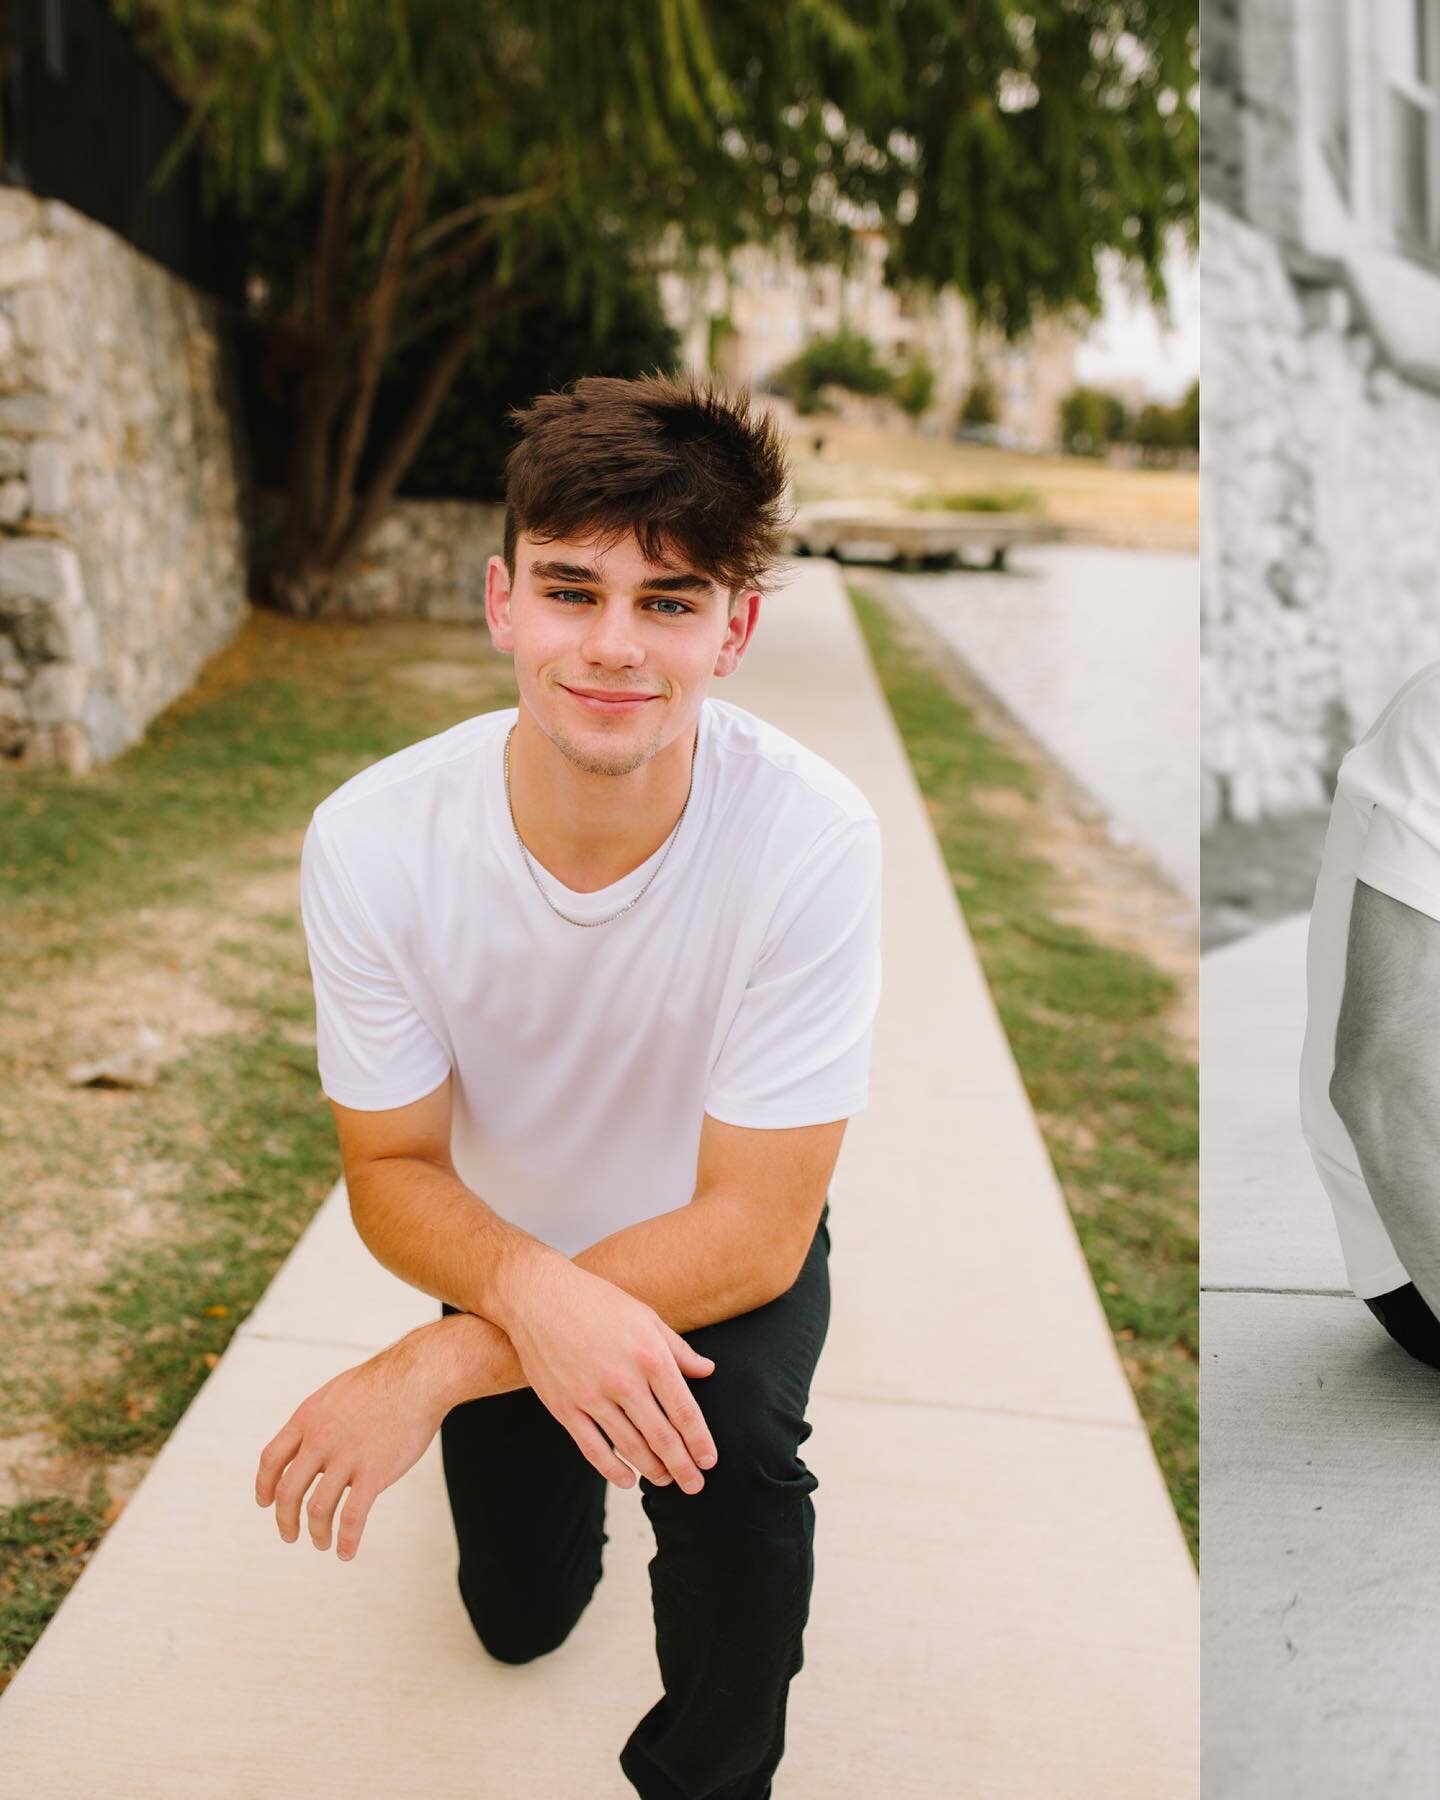 Senior Sunday!! Here are some favorites from Noah&rsquo;s session last month 🎉
&bull;
Now booking for spring!! Reach out to claim a spot 💗
&bull;
&bull;
&bull;
#parkerannseniors #posepatch #thetwelfthyear #senioryearmagazine #seniorstyleguide #thes